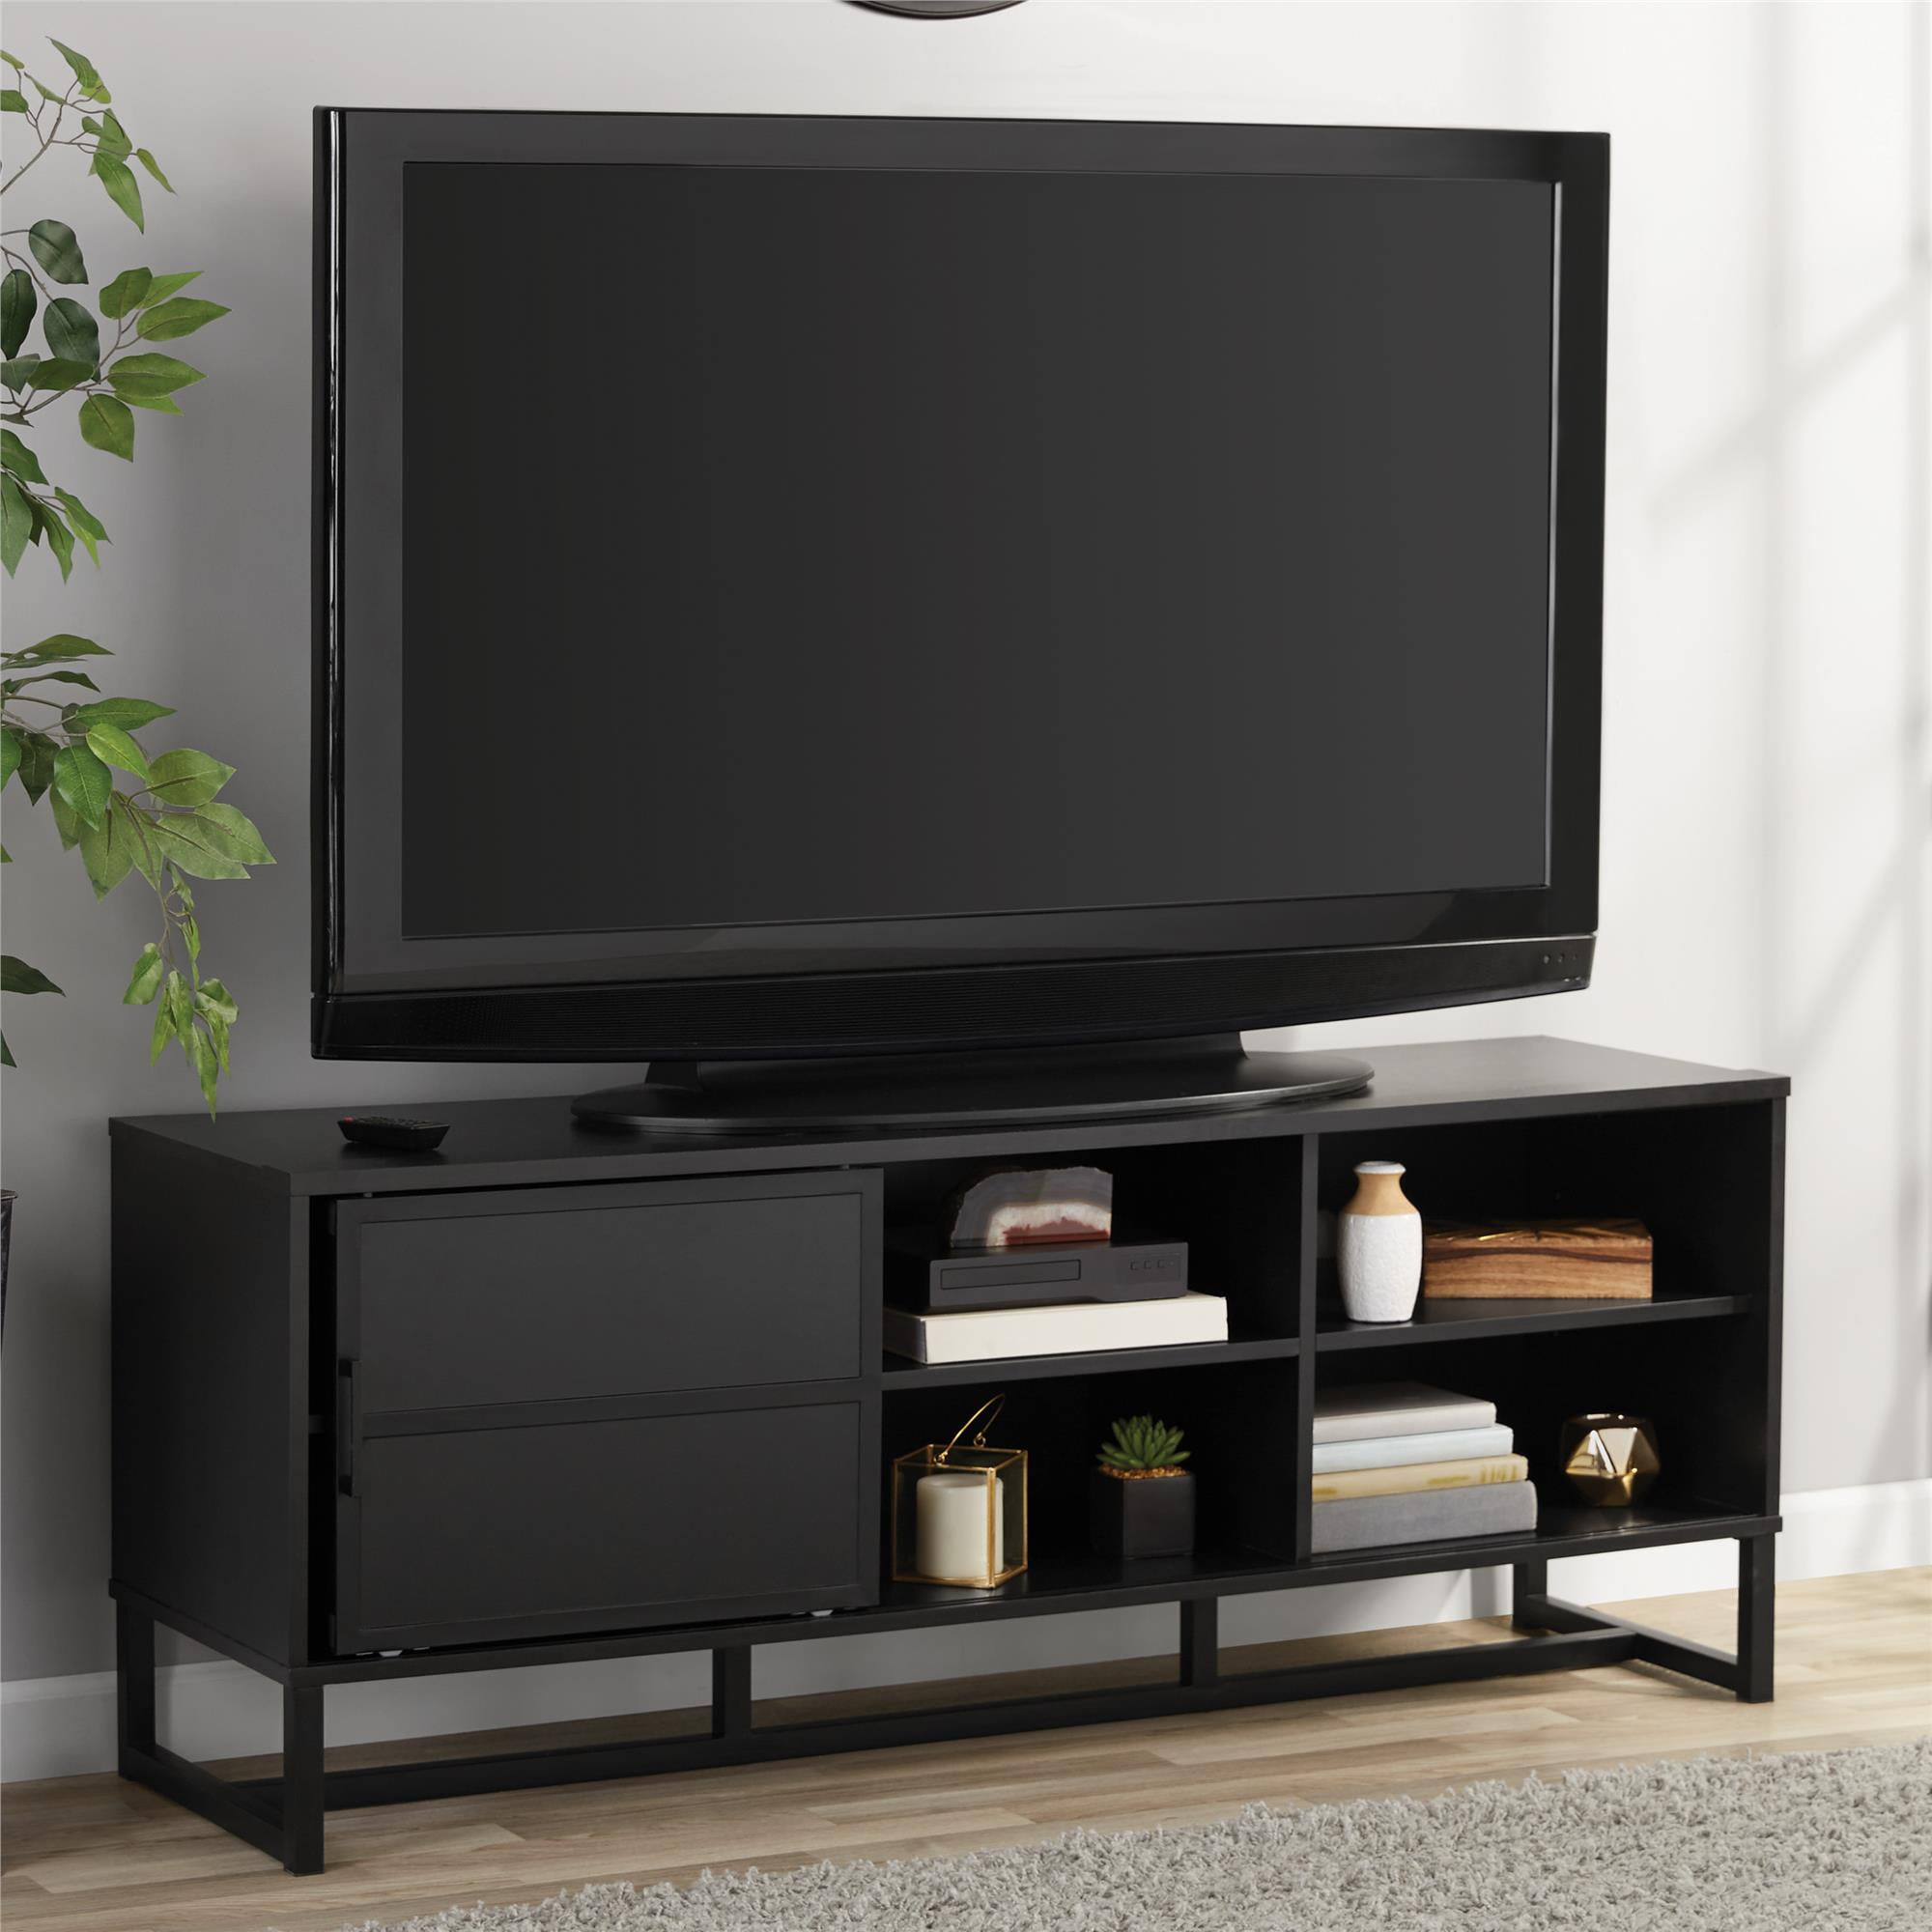 Mainstays 60 Inch Tv Console With, Flat Screen Tv Cabinet With Sliding Doors